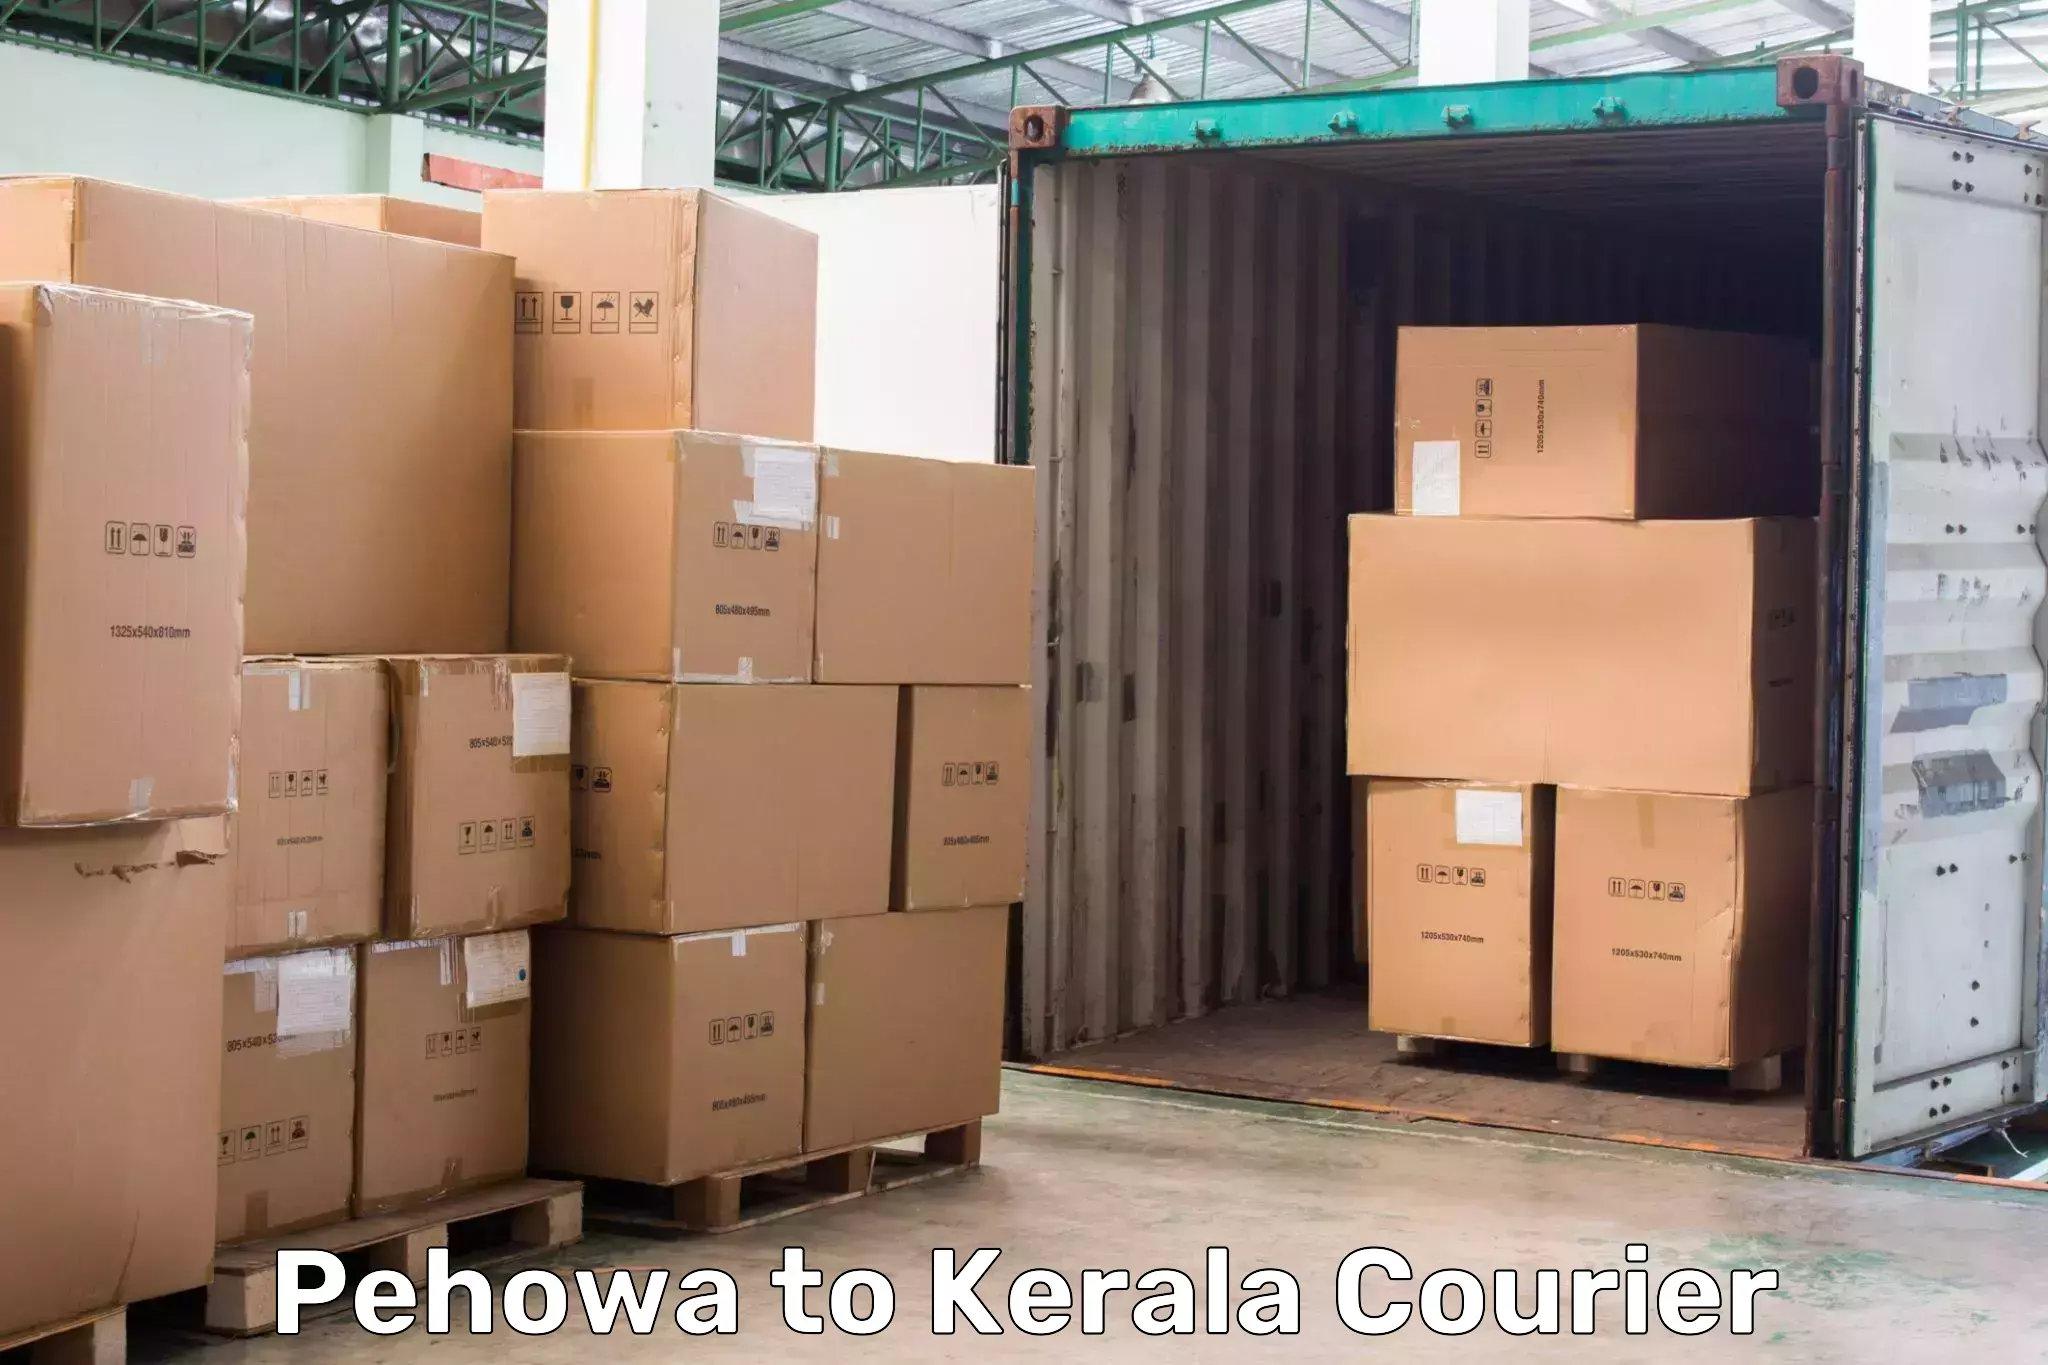 24/7 courier service Pehowa to Mahe